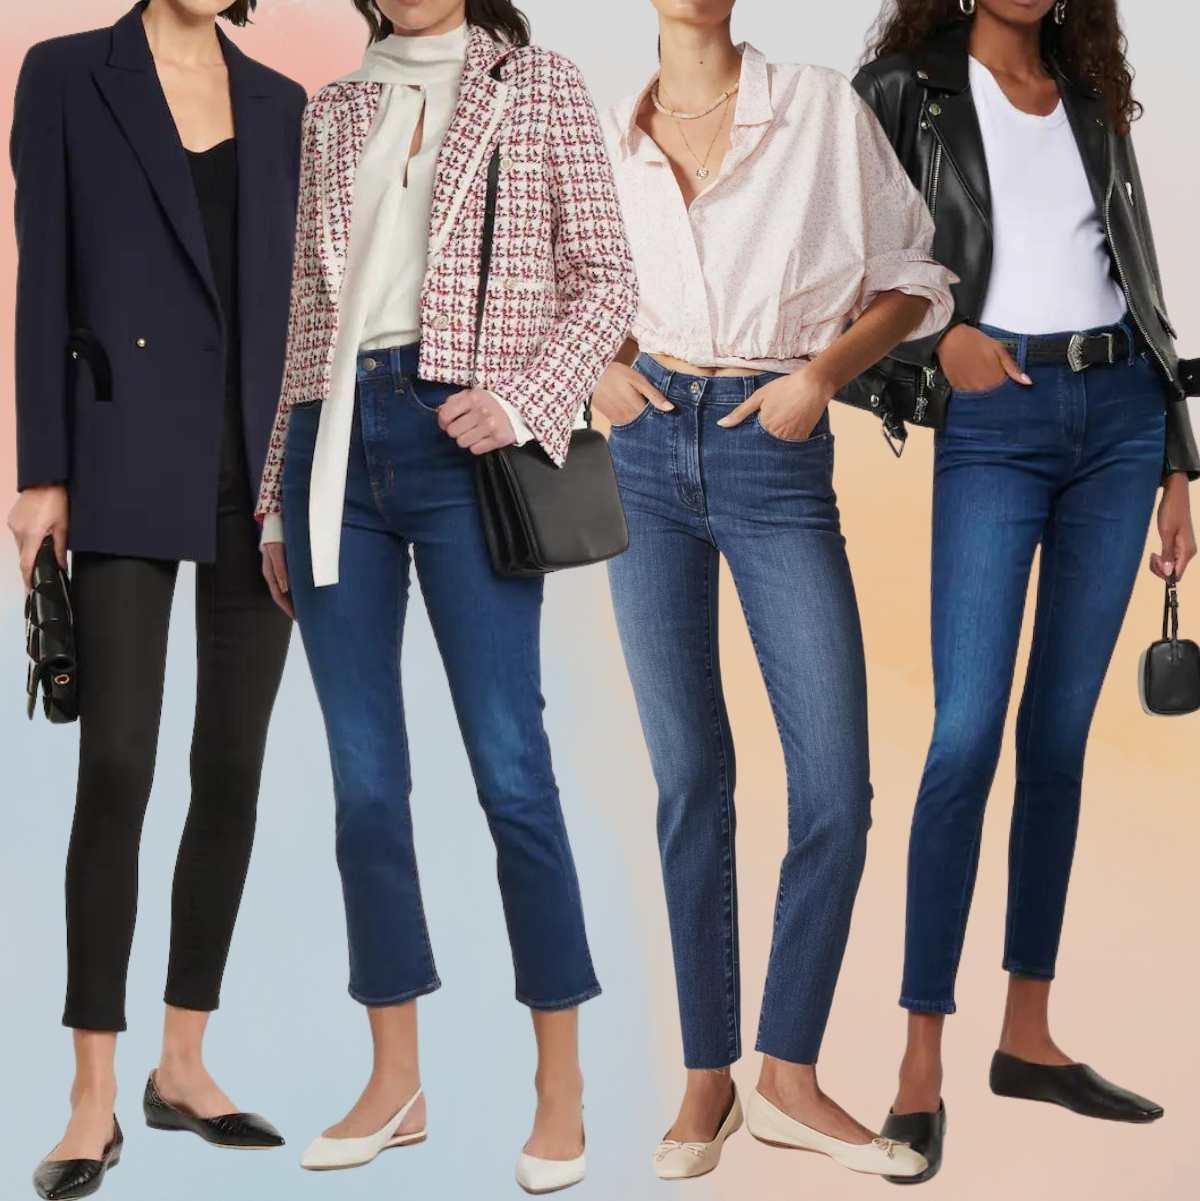 Collage of 4 women wearing flat strappy sandal shoes with skinny jeans outfits.